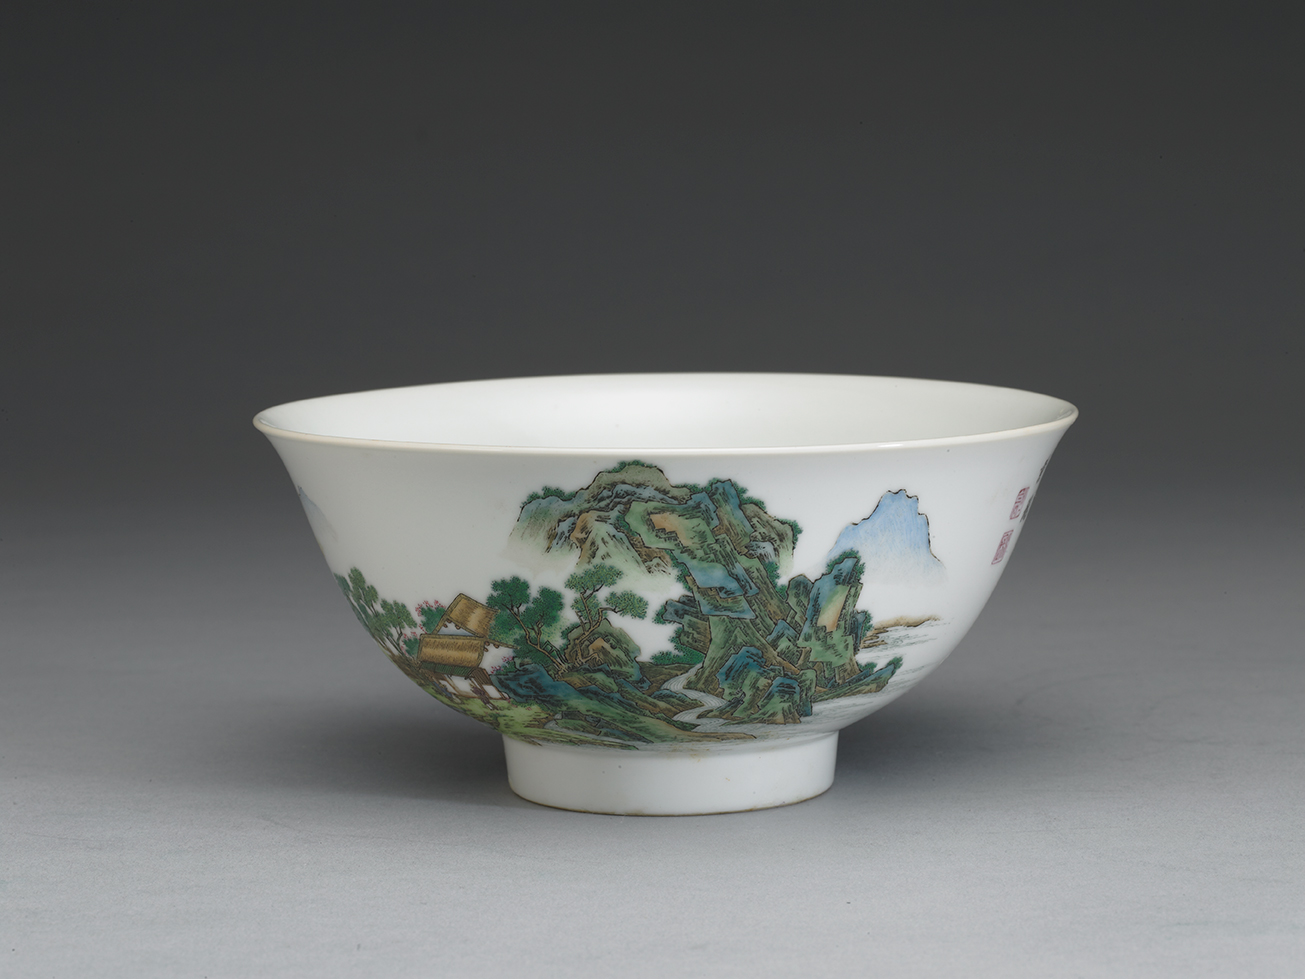 Bowl with landscape and figure in falangcai painted enamels